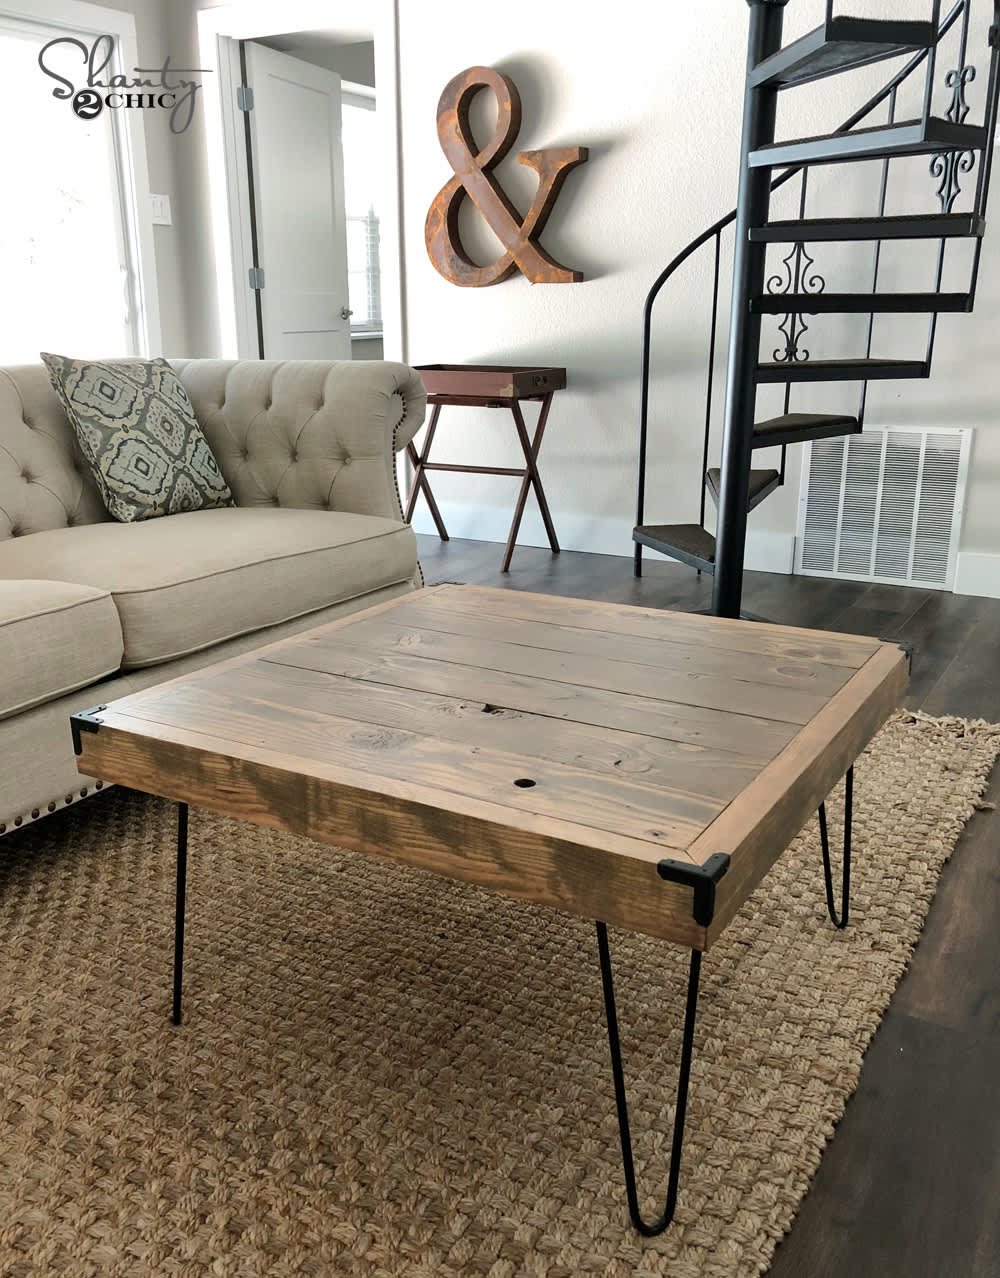 DIY Coffee Table with Storage, Free Plans